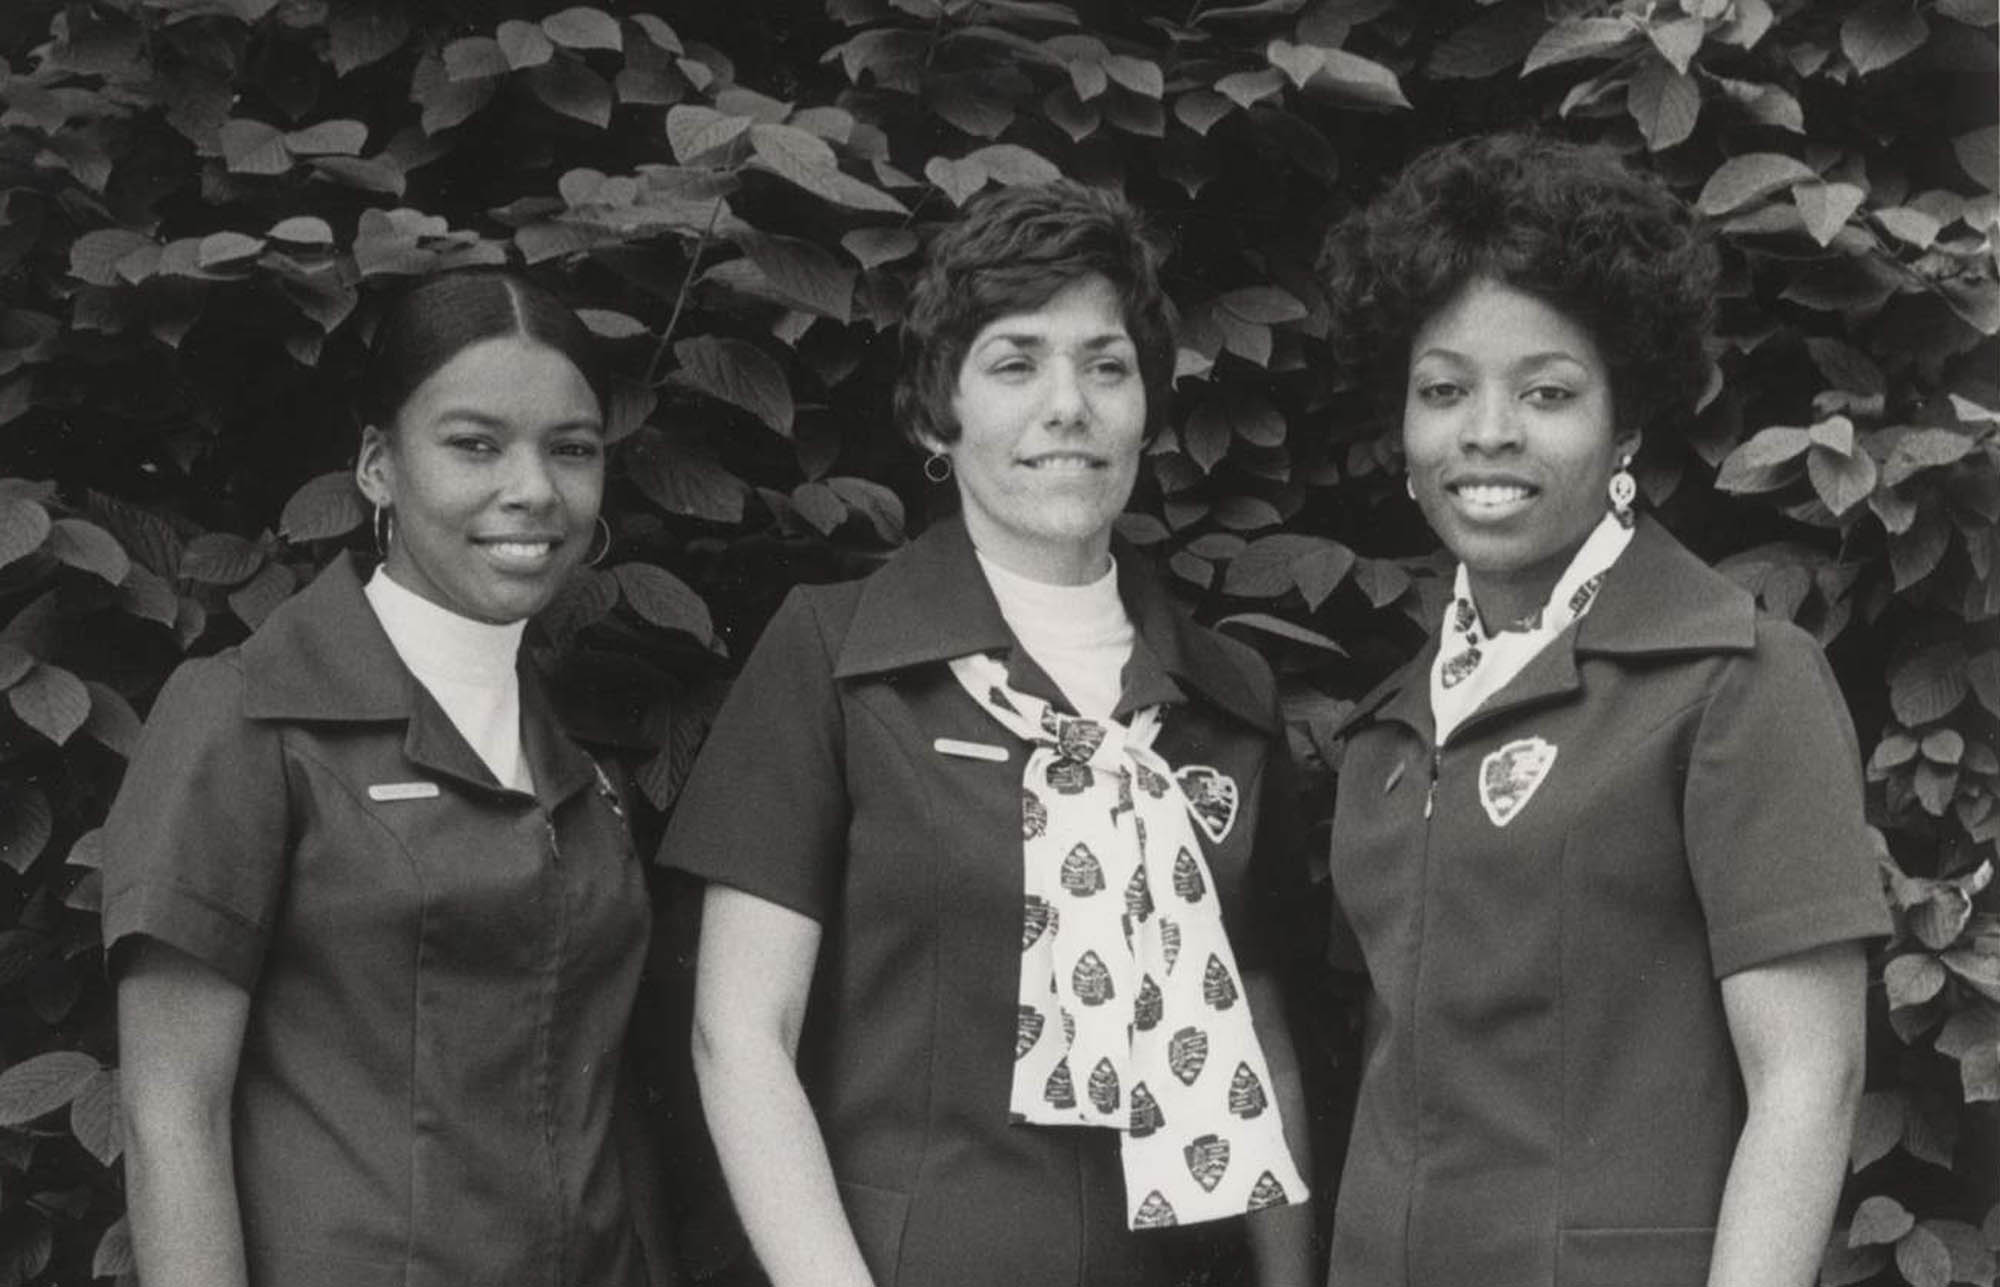 Three Women Wearing the 1974 Uniform with Arrowhead Patch